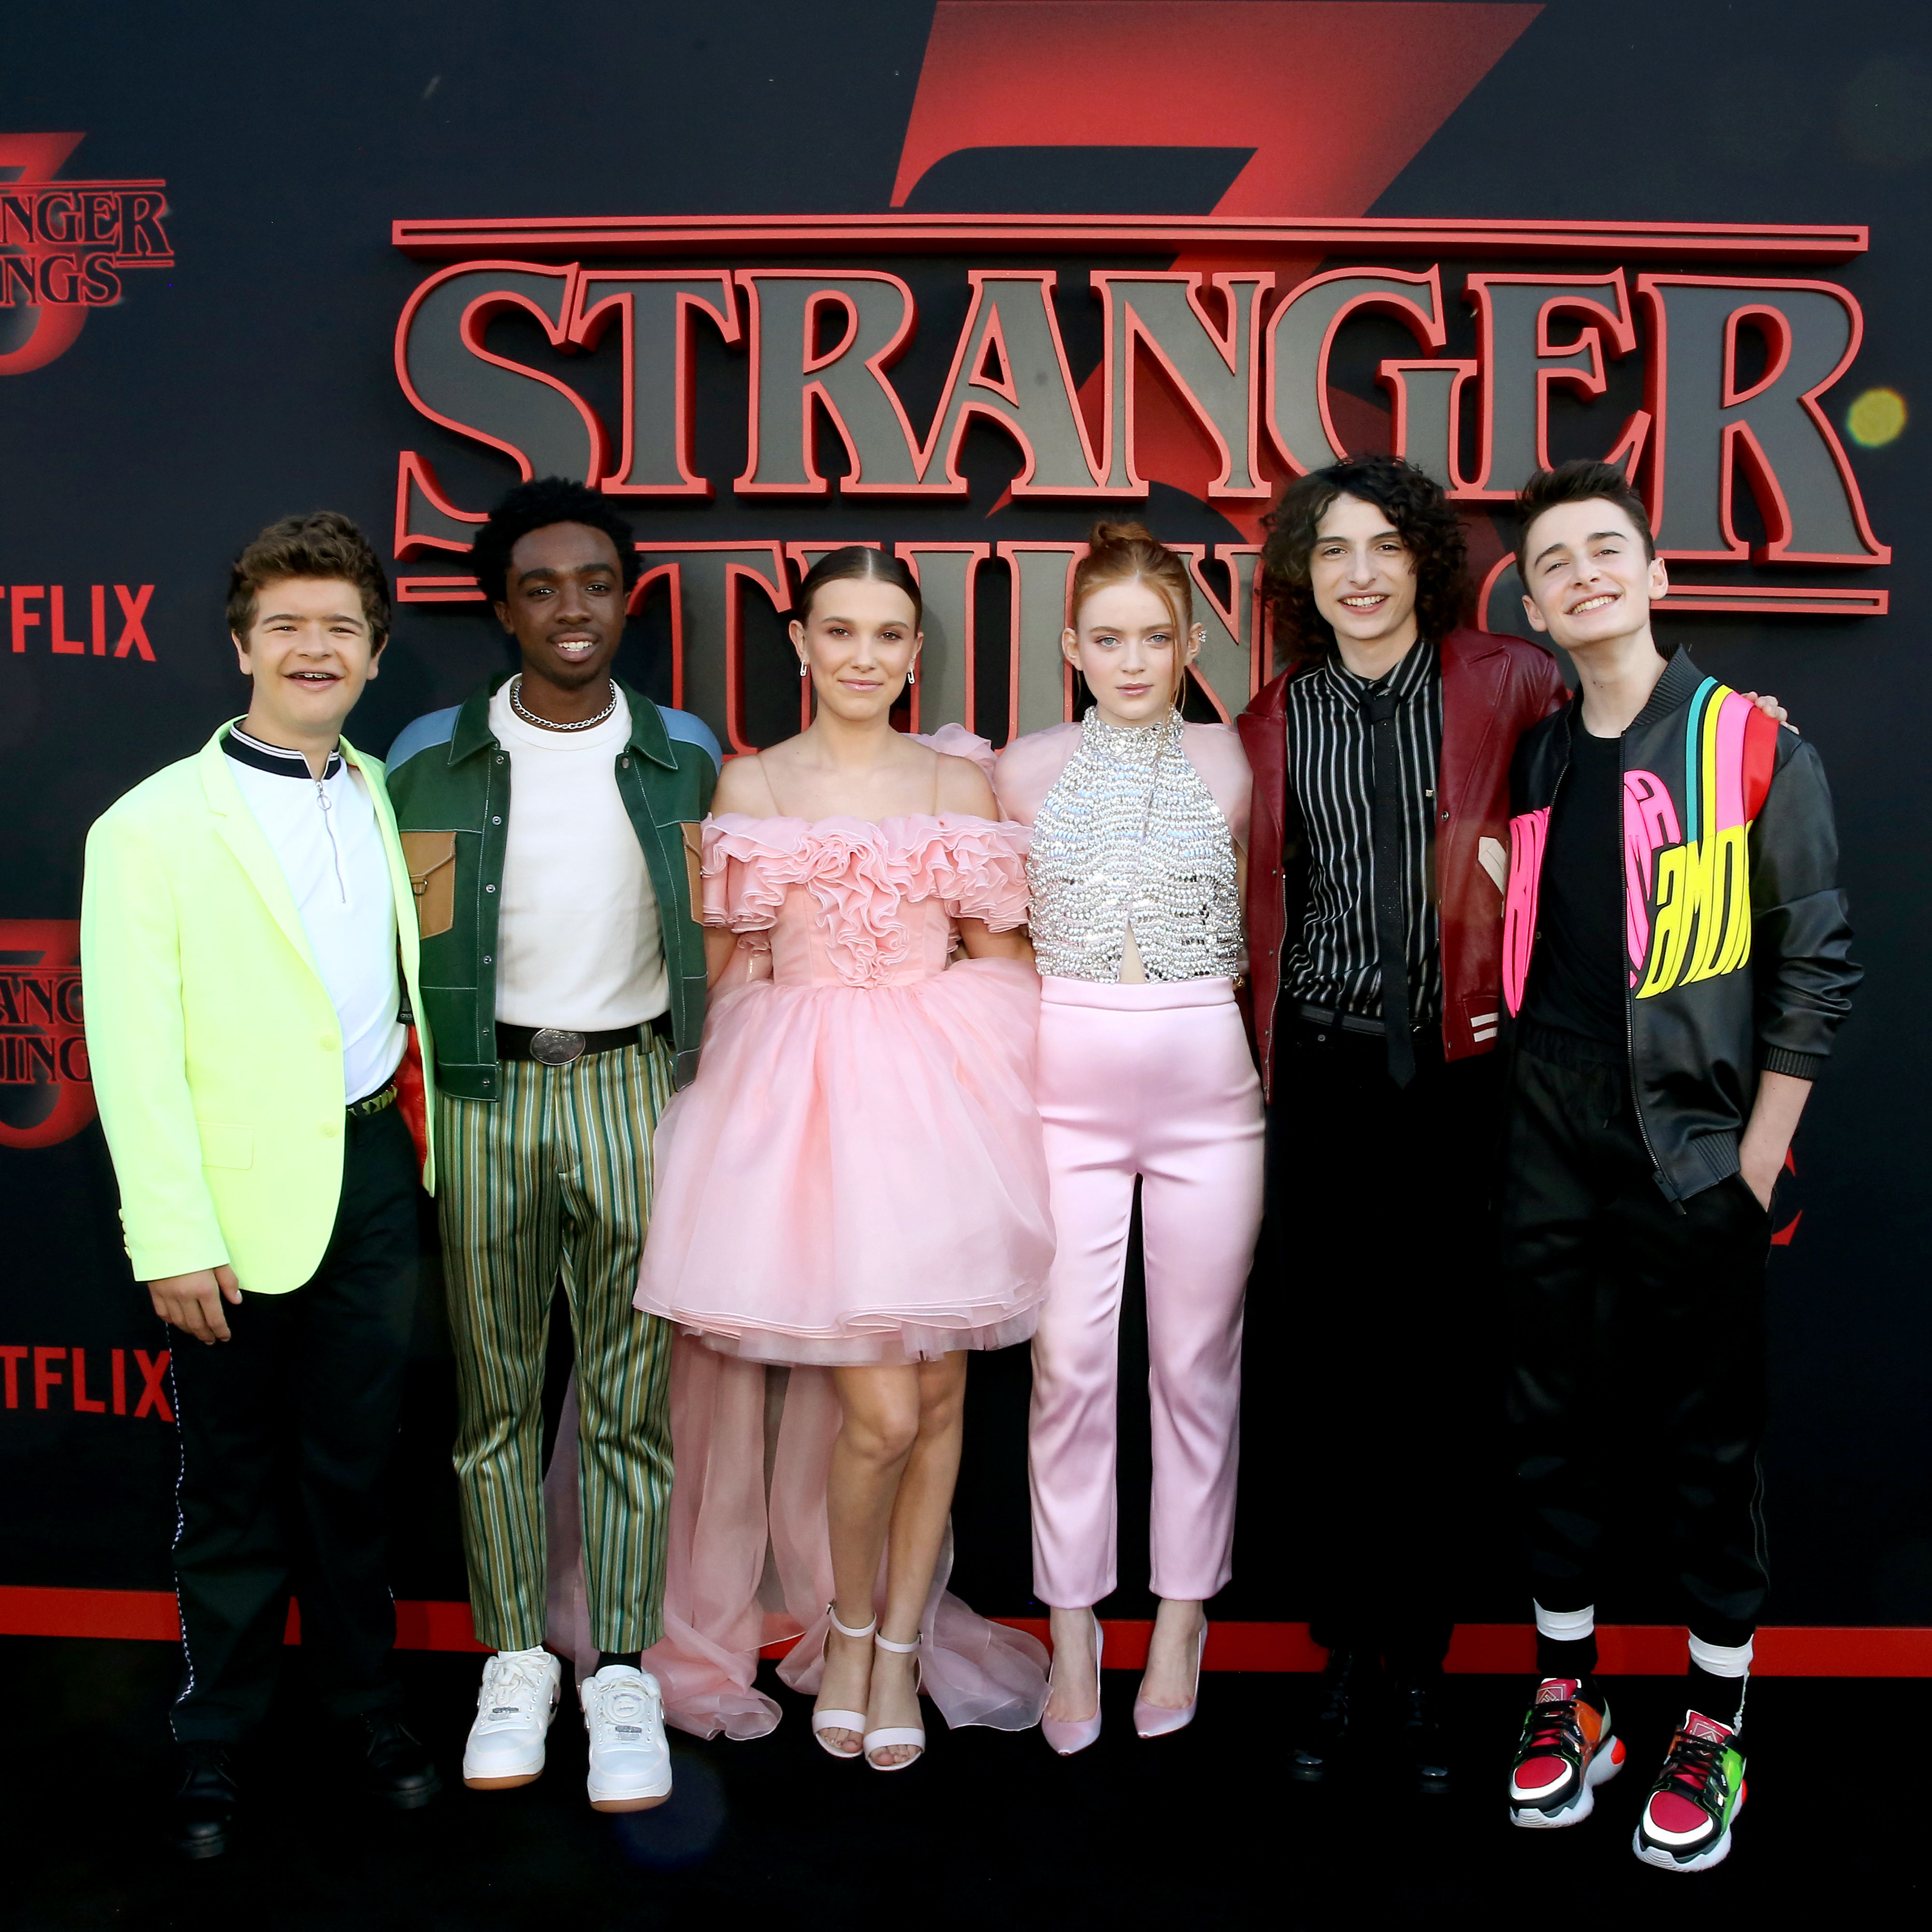 Millie Bobby Brown at the 'Stranger Things' Season 3 premiere